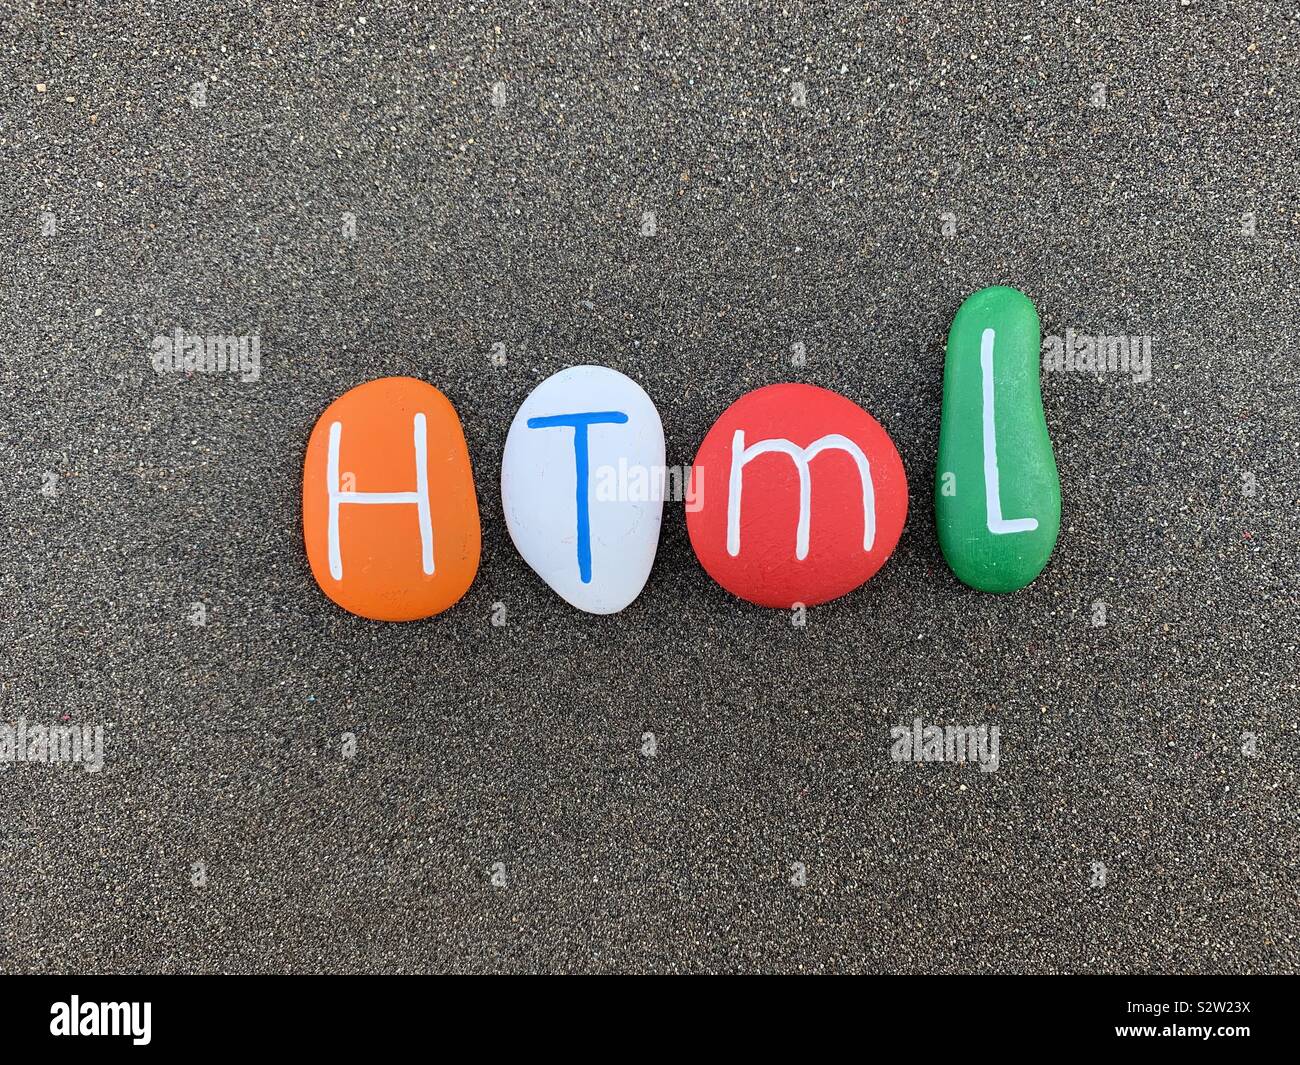 HTML, HyperText Markup Language composed with colored stones over black volcanic sand Stock Photo